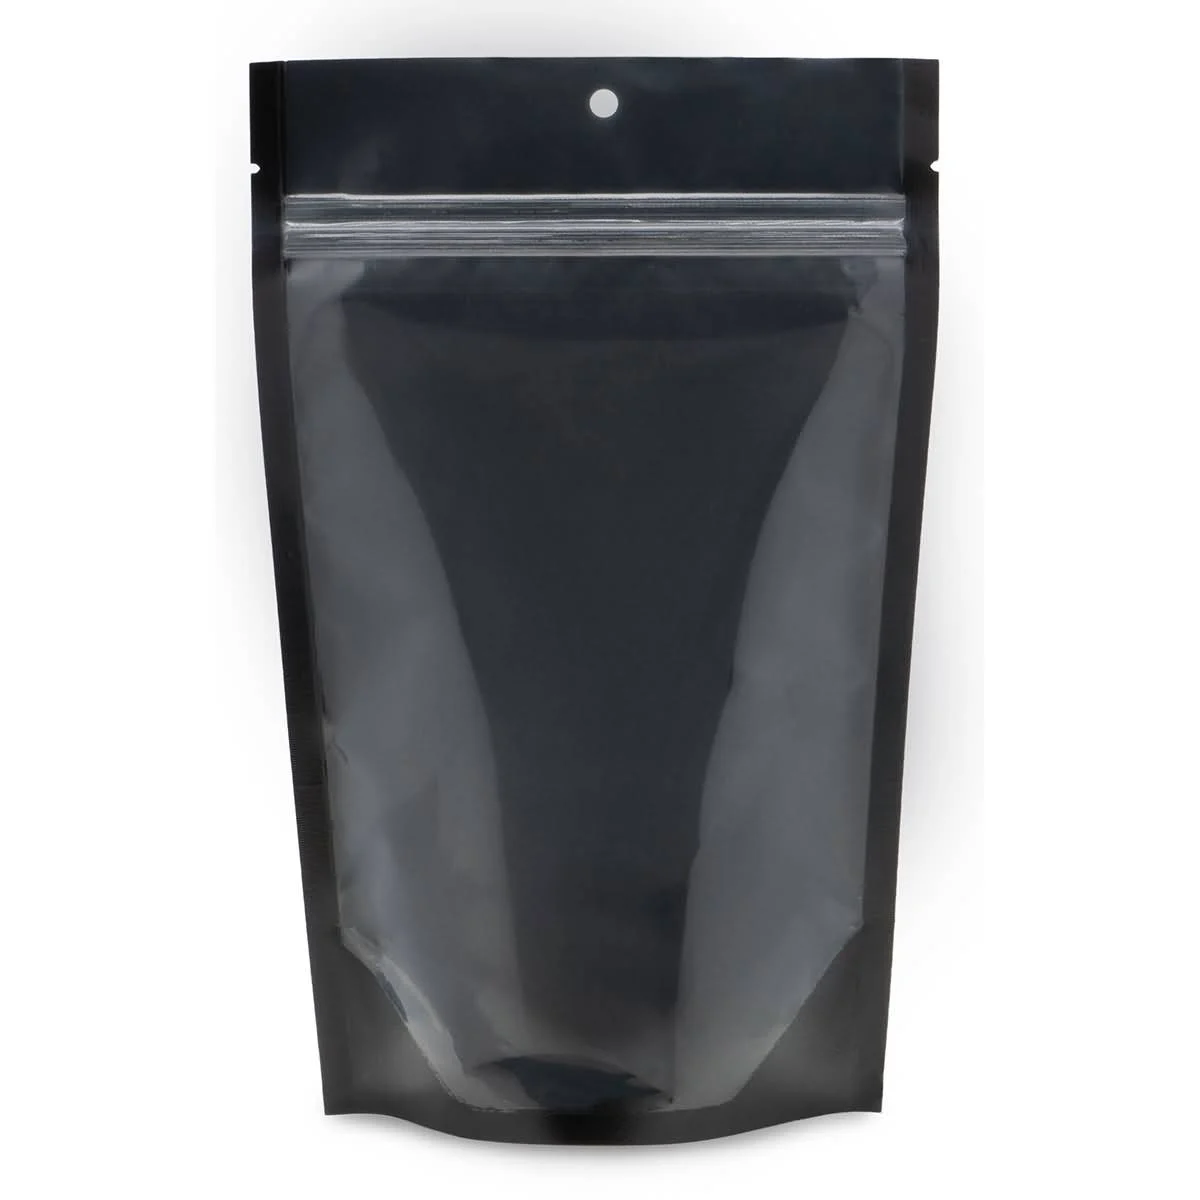 https://cdnimg.carepac.com/wp-content/uploads/2021/01/3618_ClearSilver_Stand_Up_pouches_1.jpg.webp